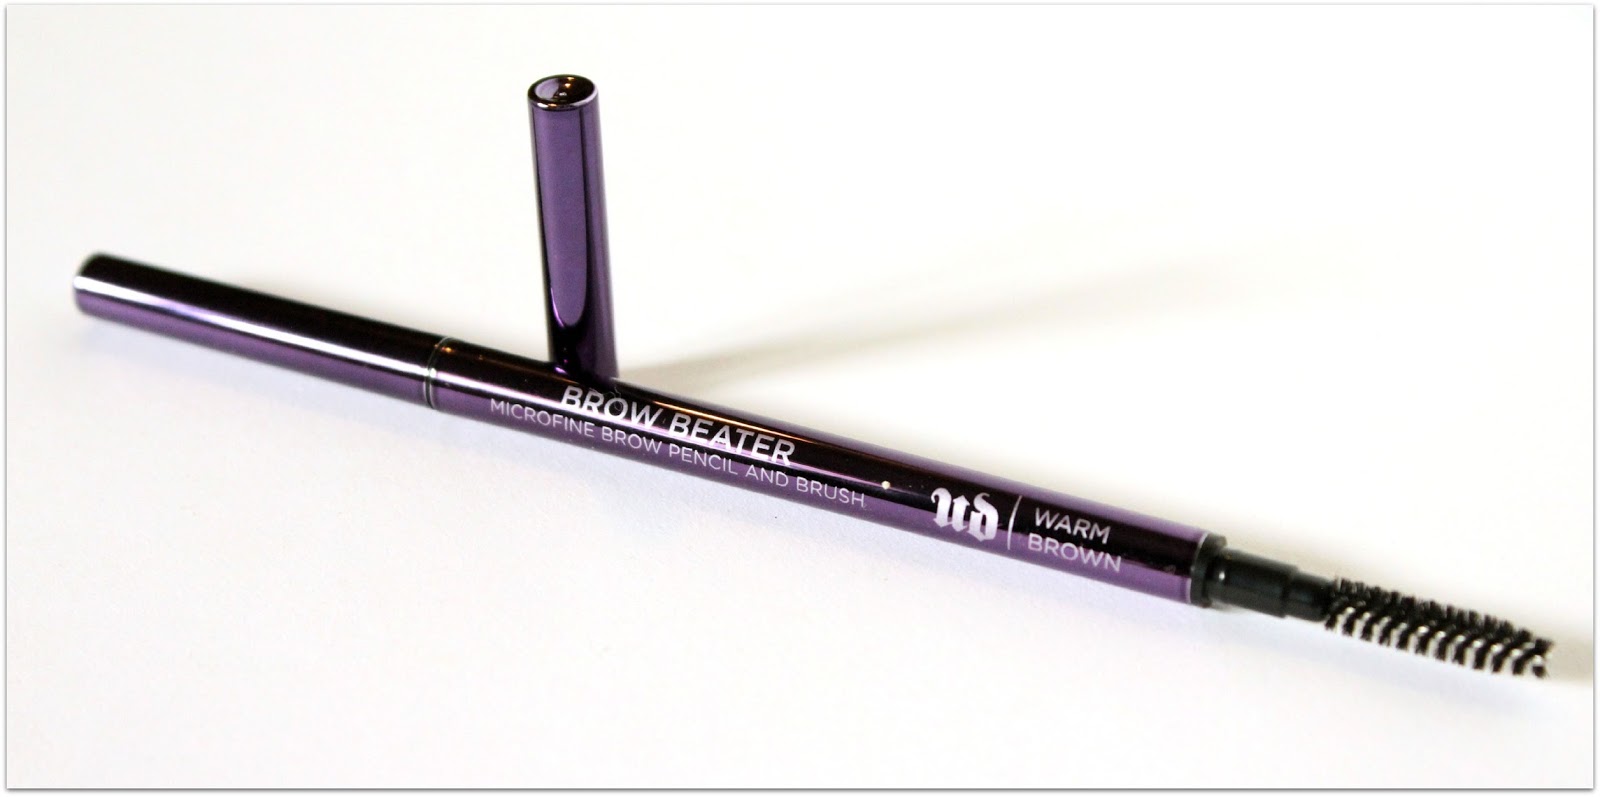 Spytte Tilskynde Omkostningsprocent Review: Urban Decay Brow Beater Microfine Brow Pencil